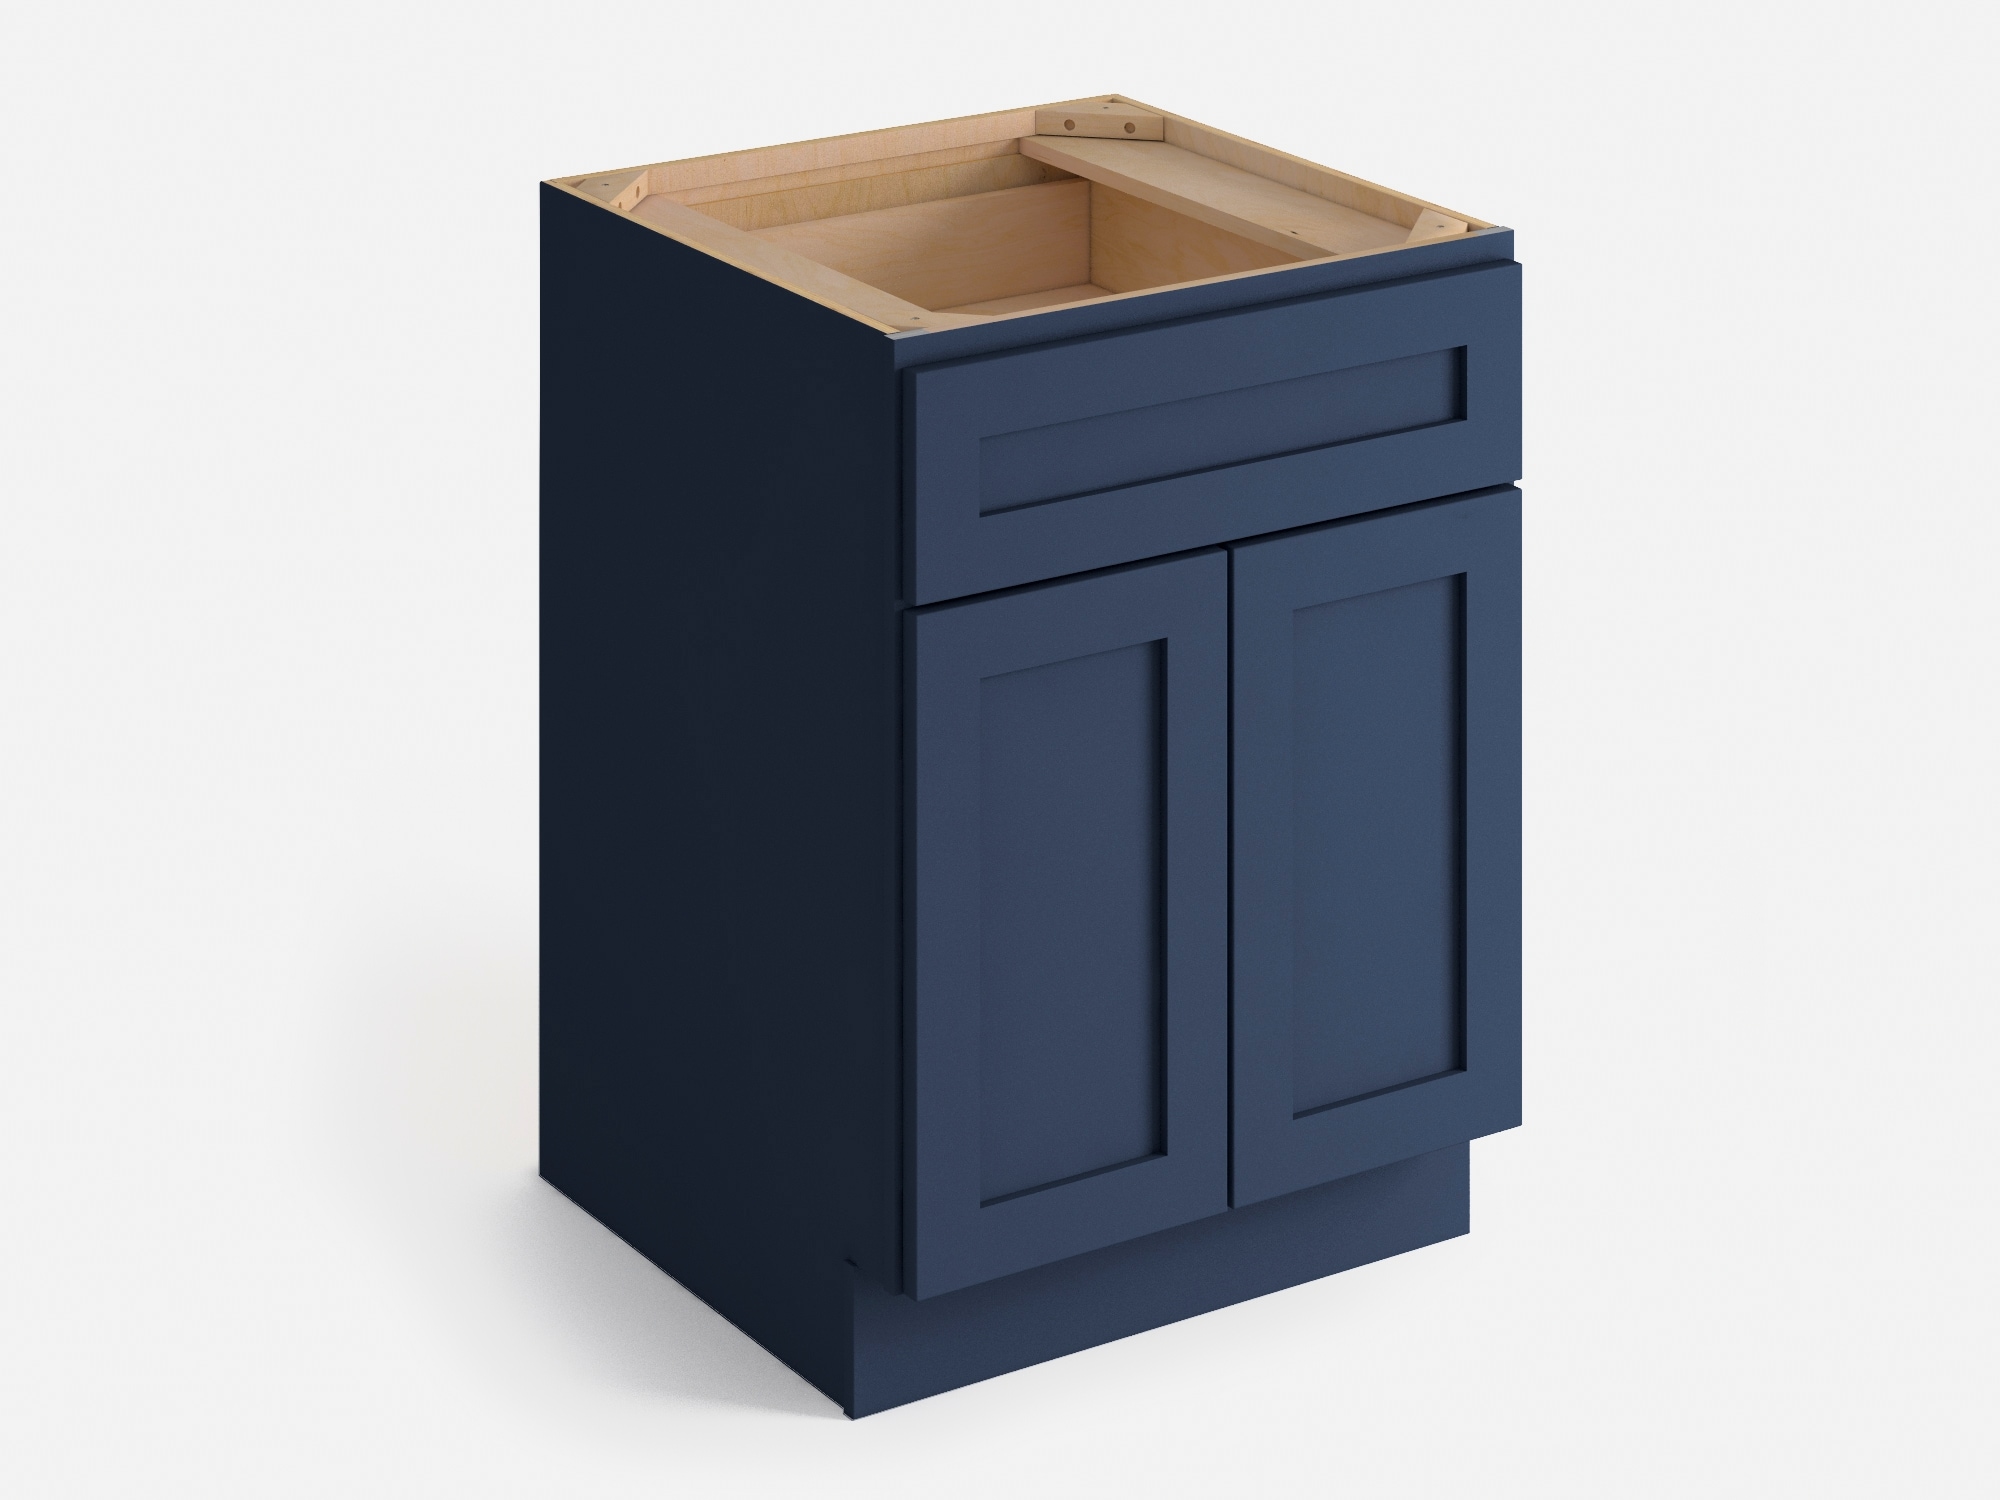 Valleywood Cabinetry 24-in W x 34.5-in H x 24-in D Marine Blue Birch ...